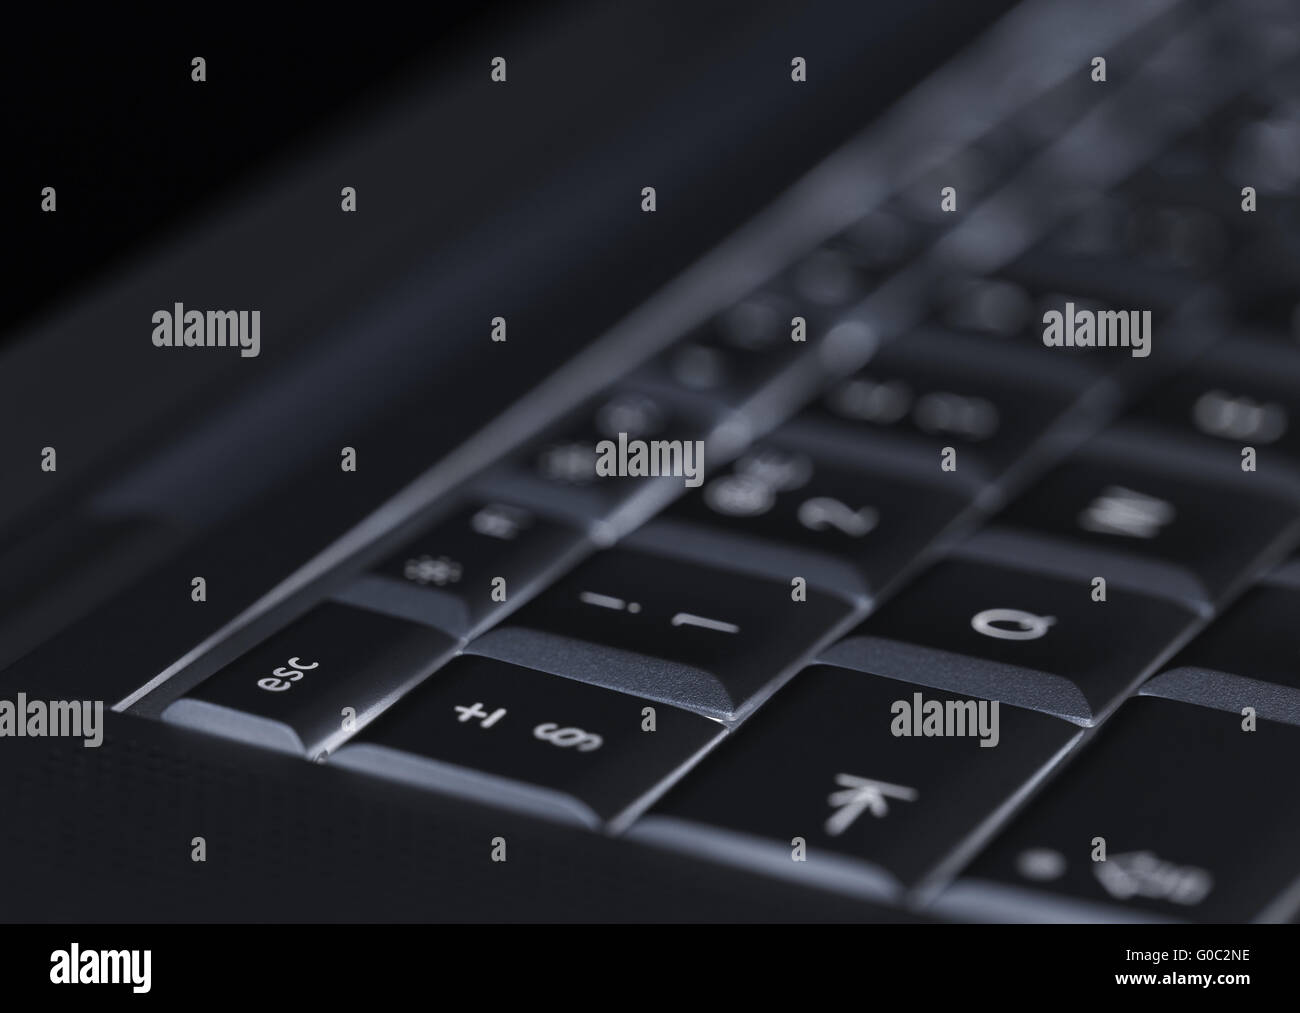 Closeup of backlit computer laptop keyboard selective focus on escape key ideal for technology night hacker standout Stock Photo